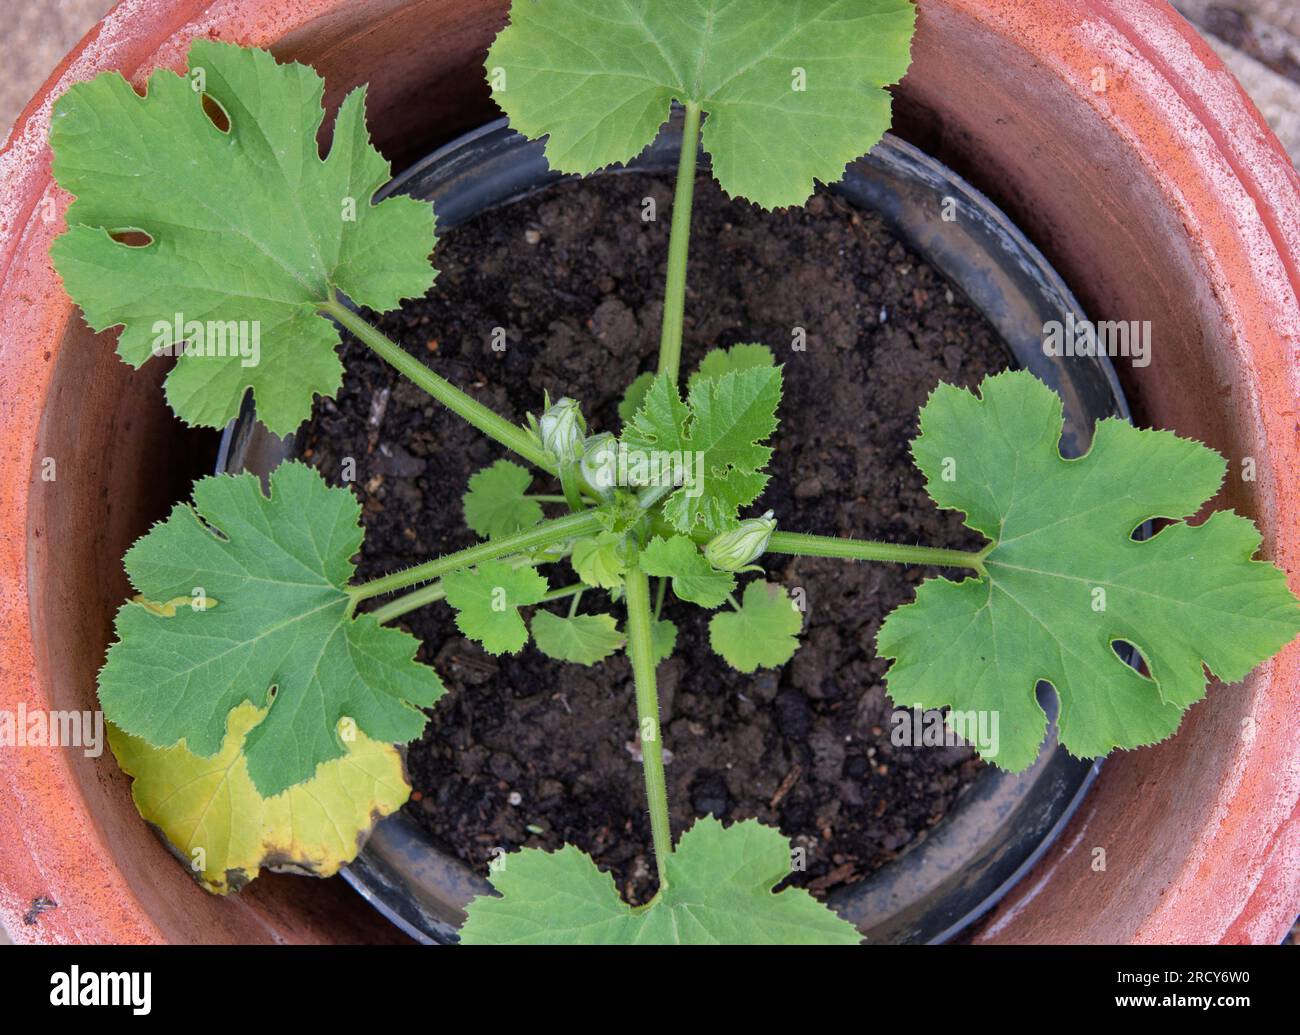 Young Courgette plant in pot, about to flower Stock Photo